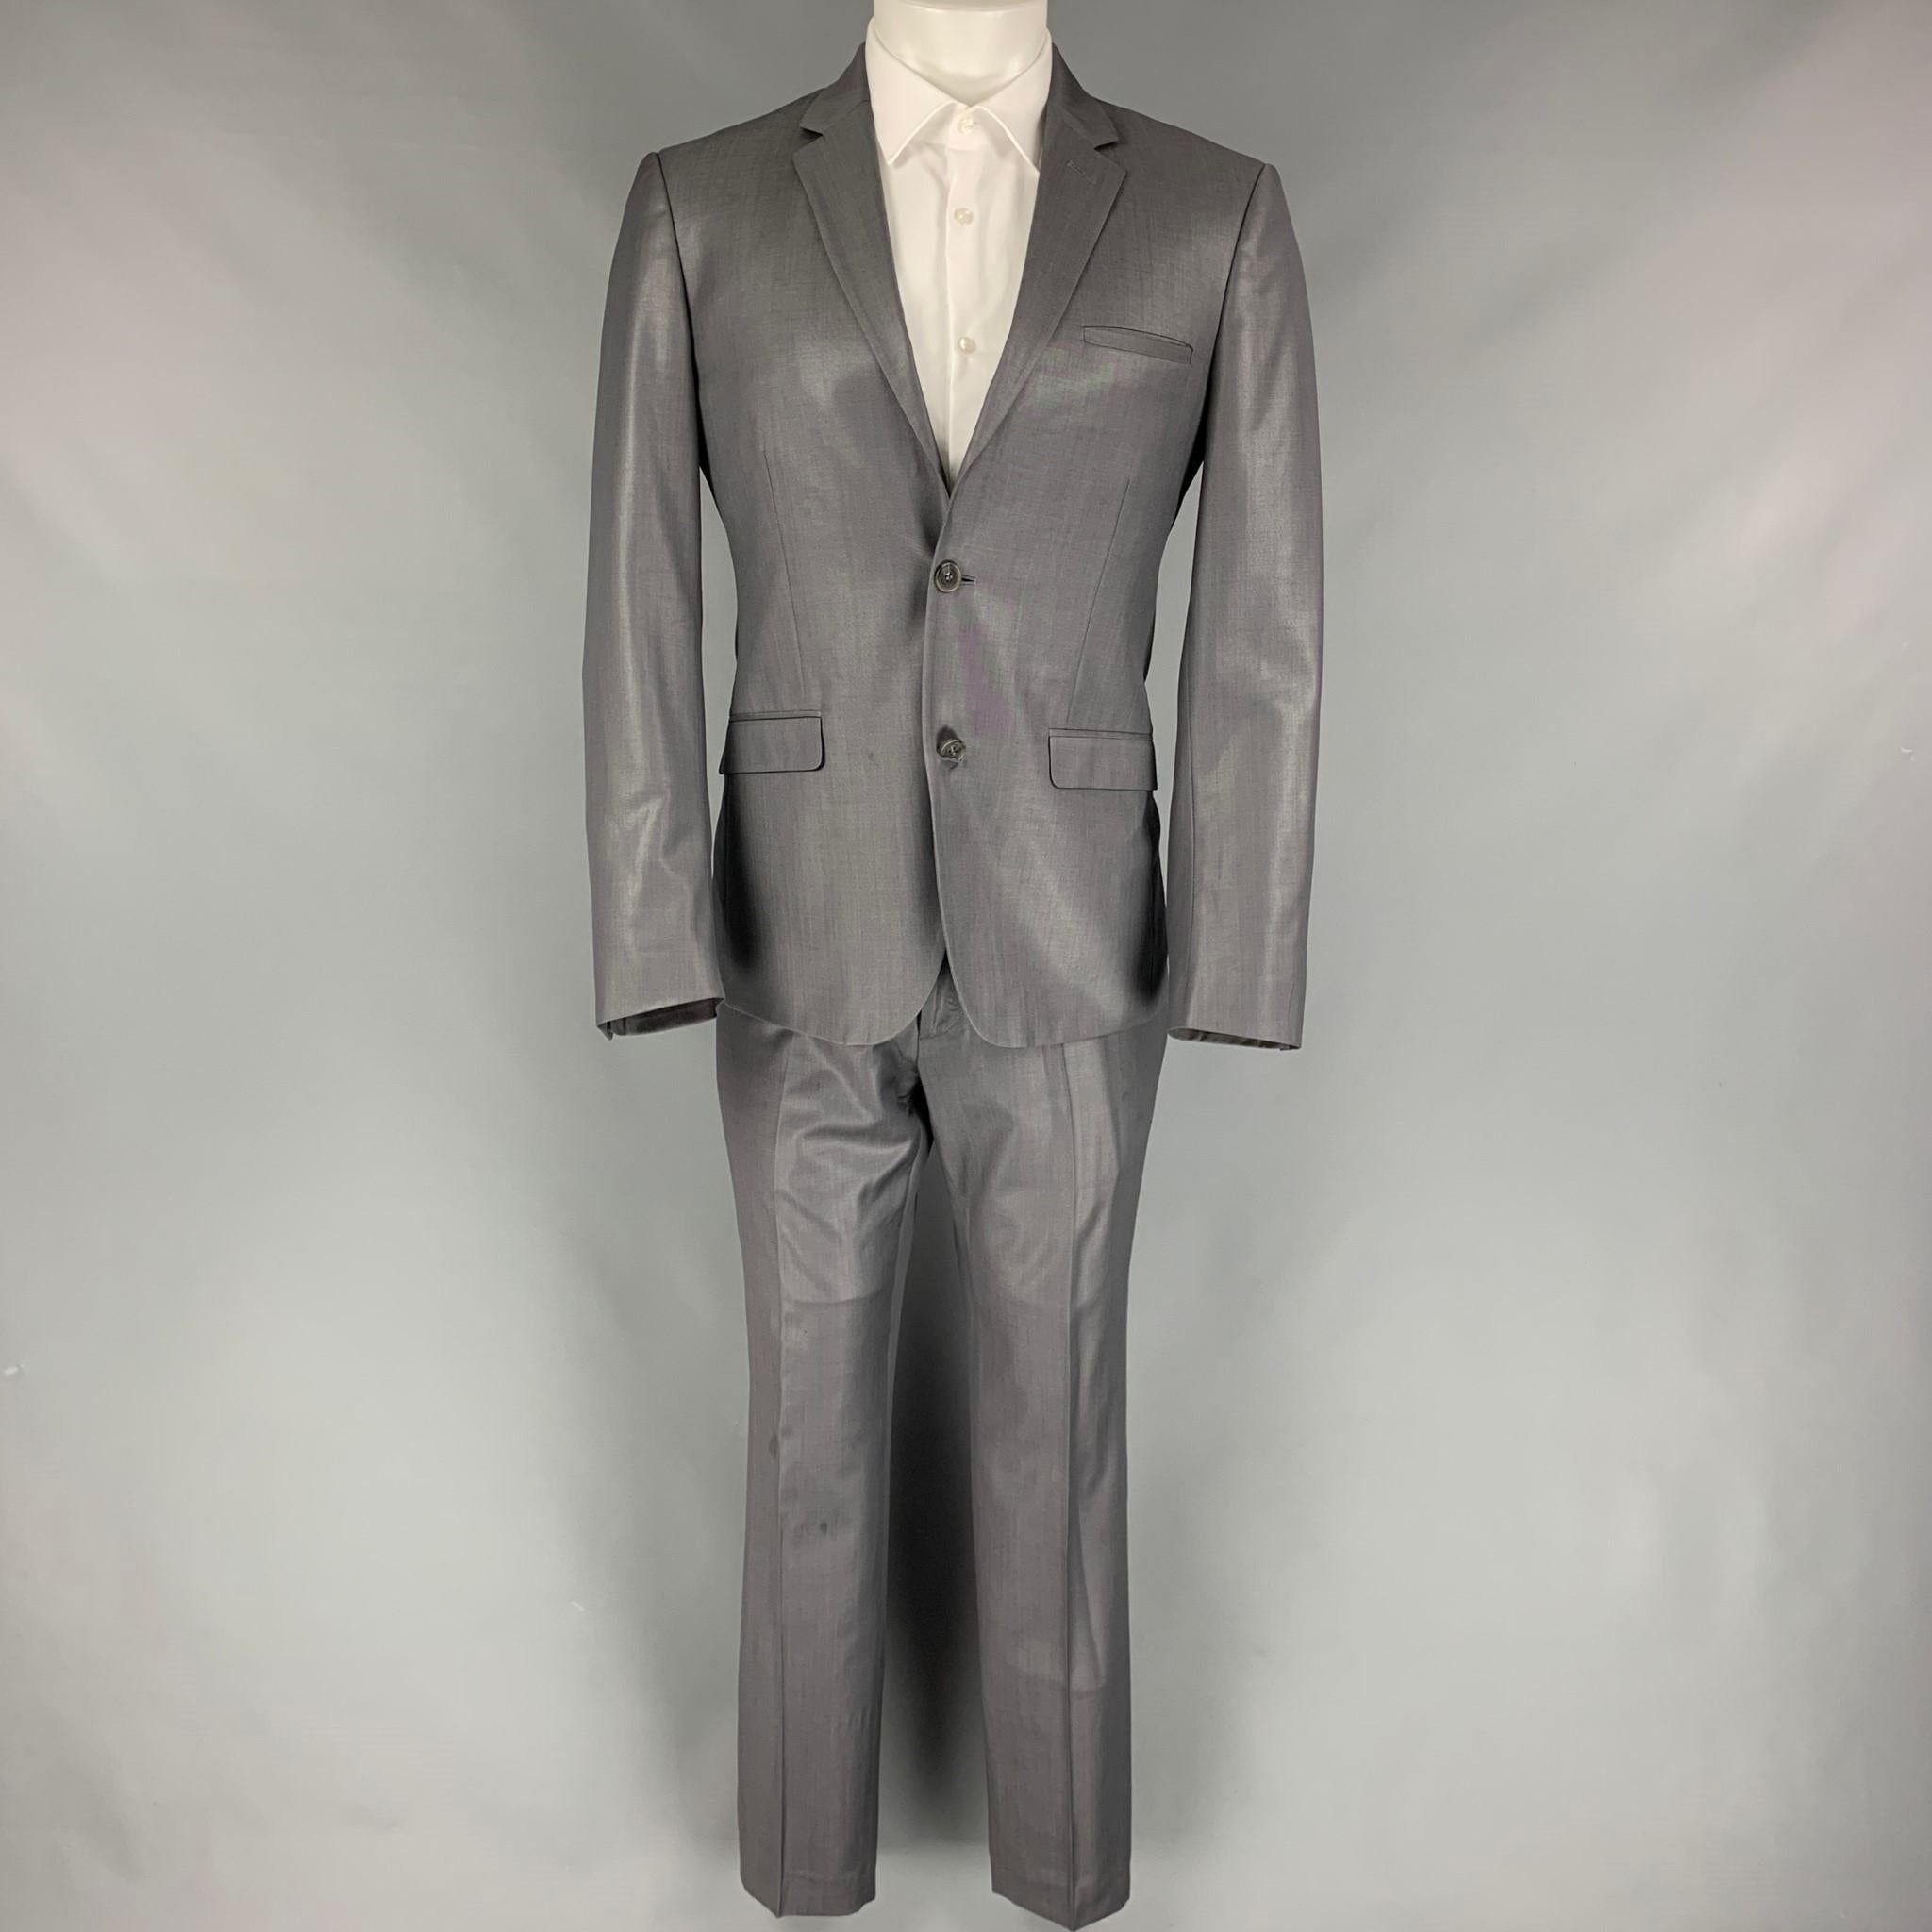 CALVIN KLEIN COLLECTION suit comes in a dark wool with a full liner and includes a single breasted, double button sport coat with a notch lapel and matching flat front trousers.

Very Good Pre-Owned Condition.
Marked: